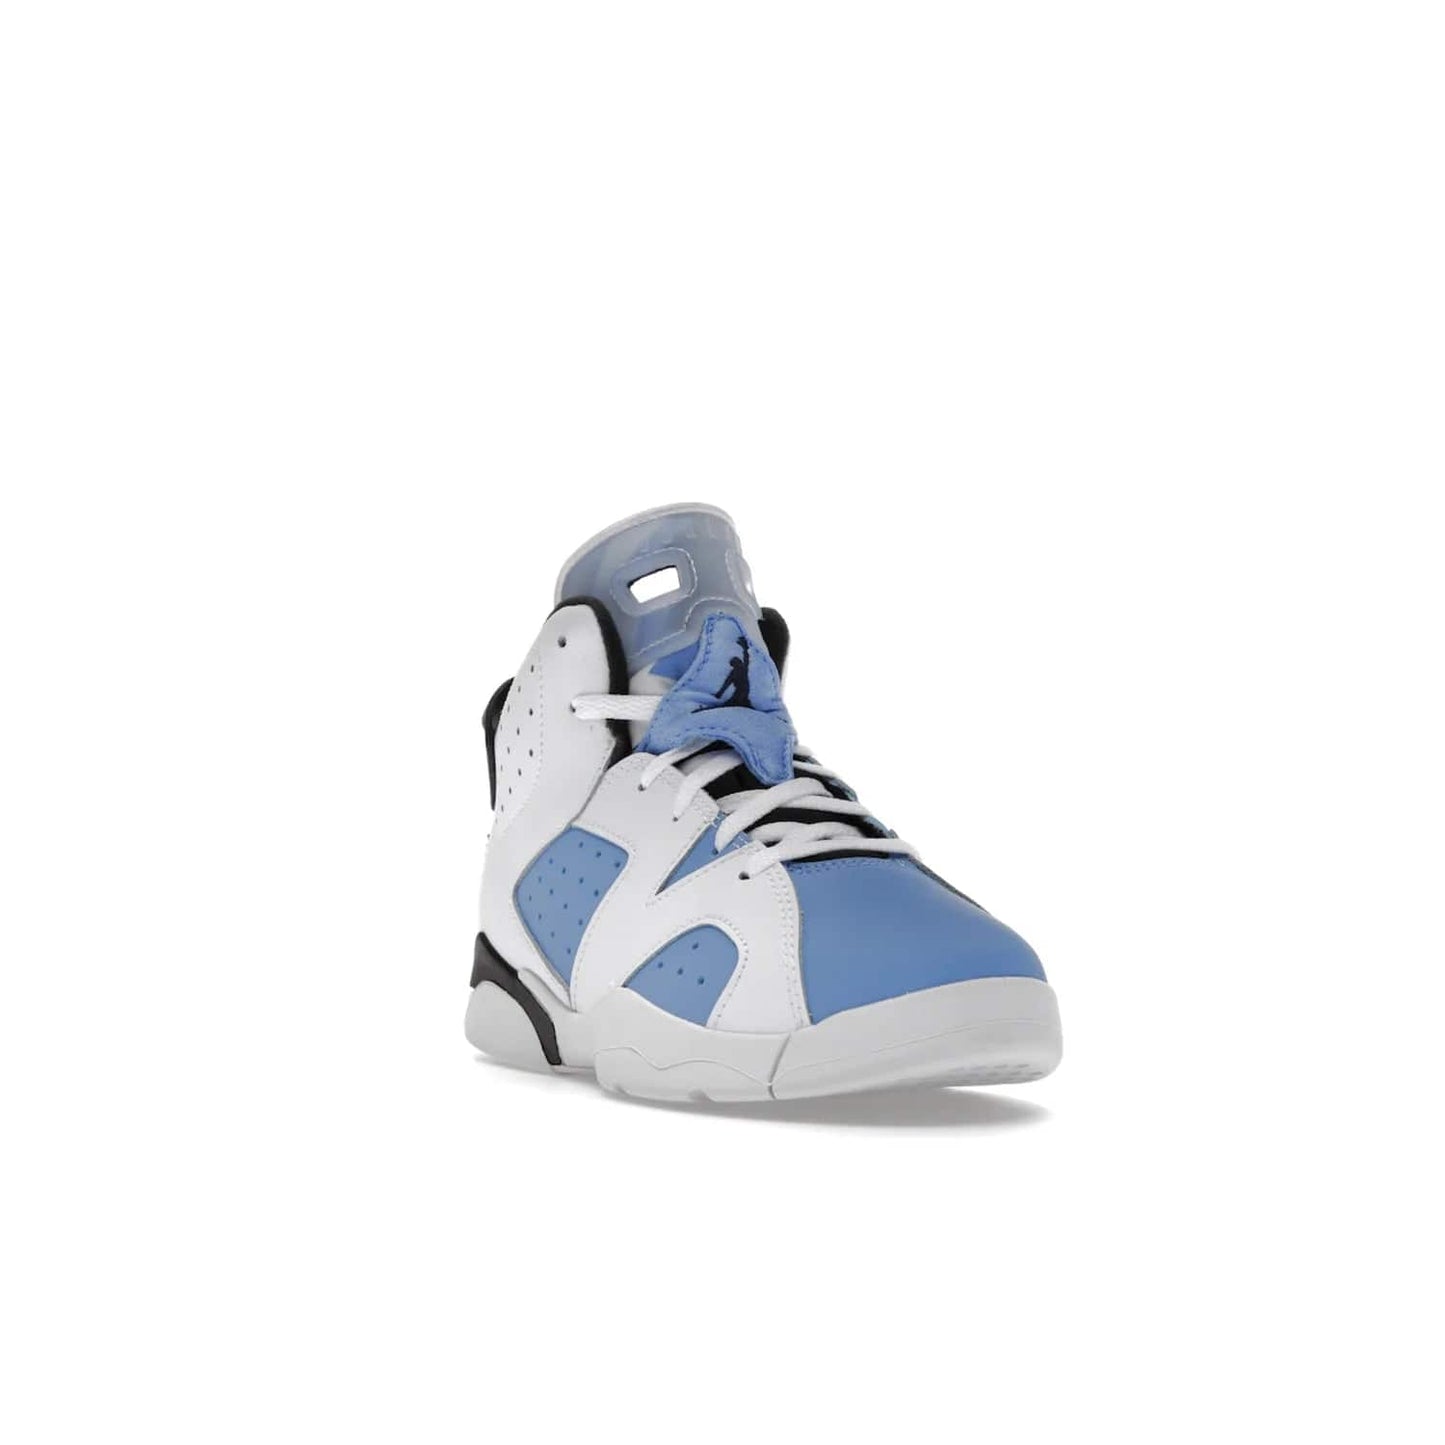 Jordan 6 Retro UNC White (PS) - Image 7 - Only at www.BallersClubKickz.com - The Air Jordan 6 Retro UNC White PS celebrates Michael Jordan's alma mater, the University of North Carolina. It features a classic color-blocking of the iconic Jordan 6 Carmine and a stitched Jordan Team patch. This must-have sneaker released on April 27th, 2022. Referencing the university colors, get this shoe for a stylish and timeless style with university pride.